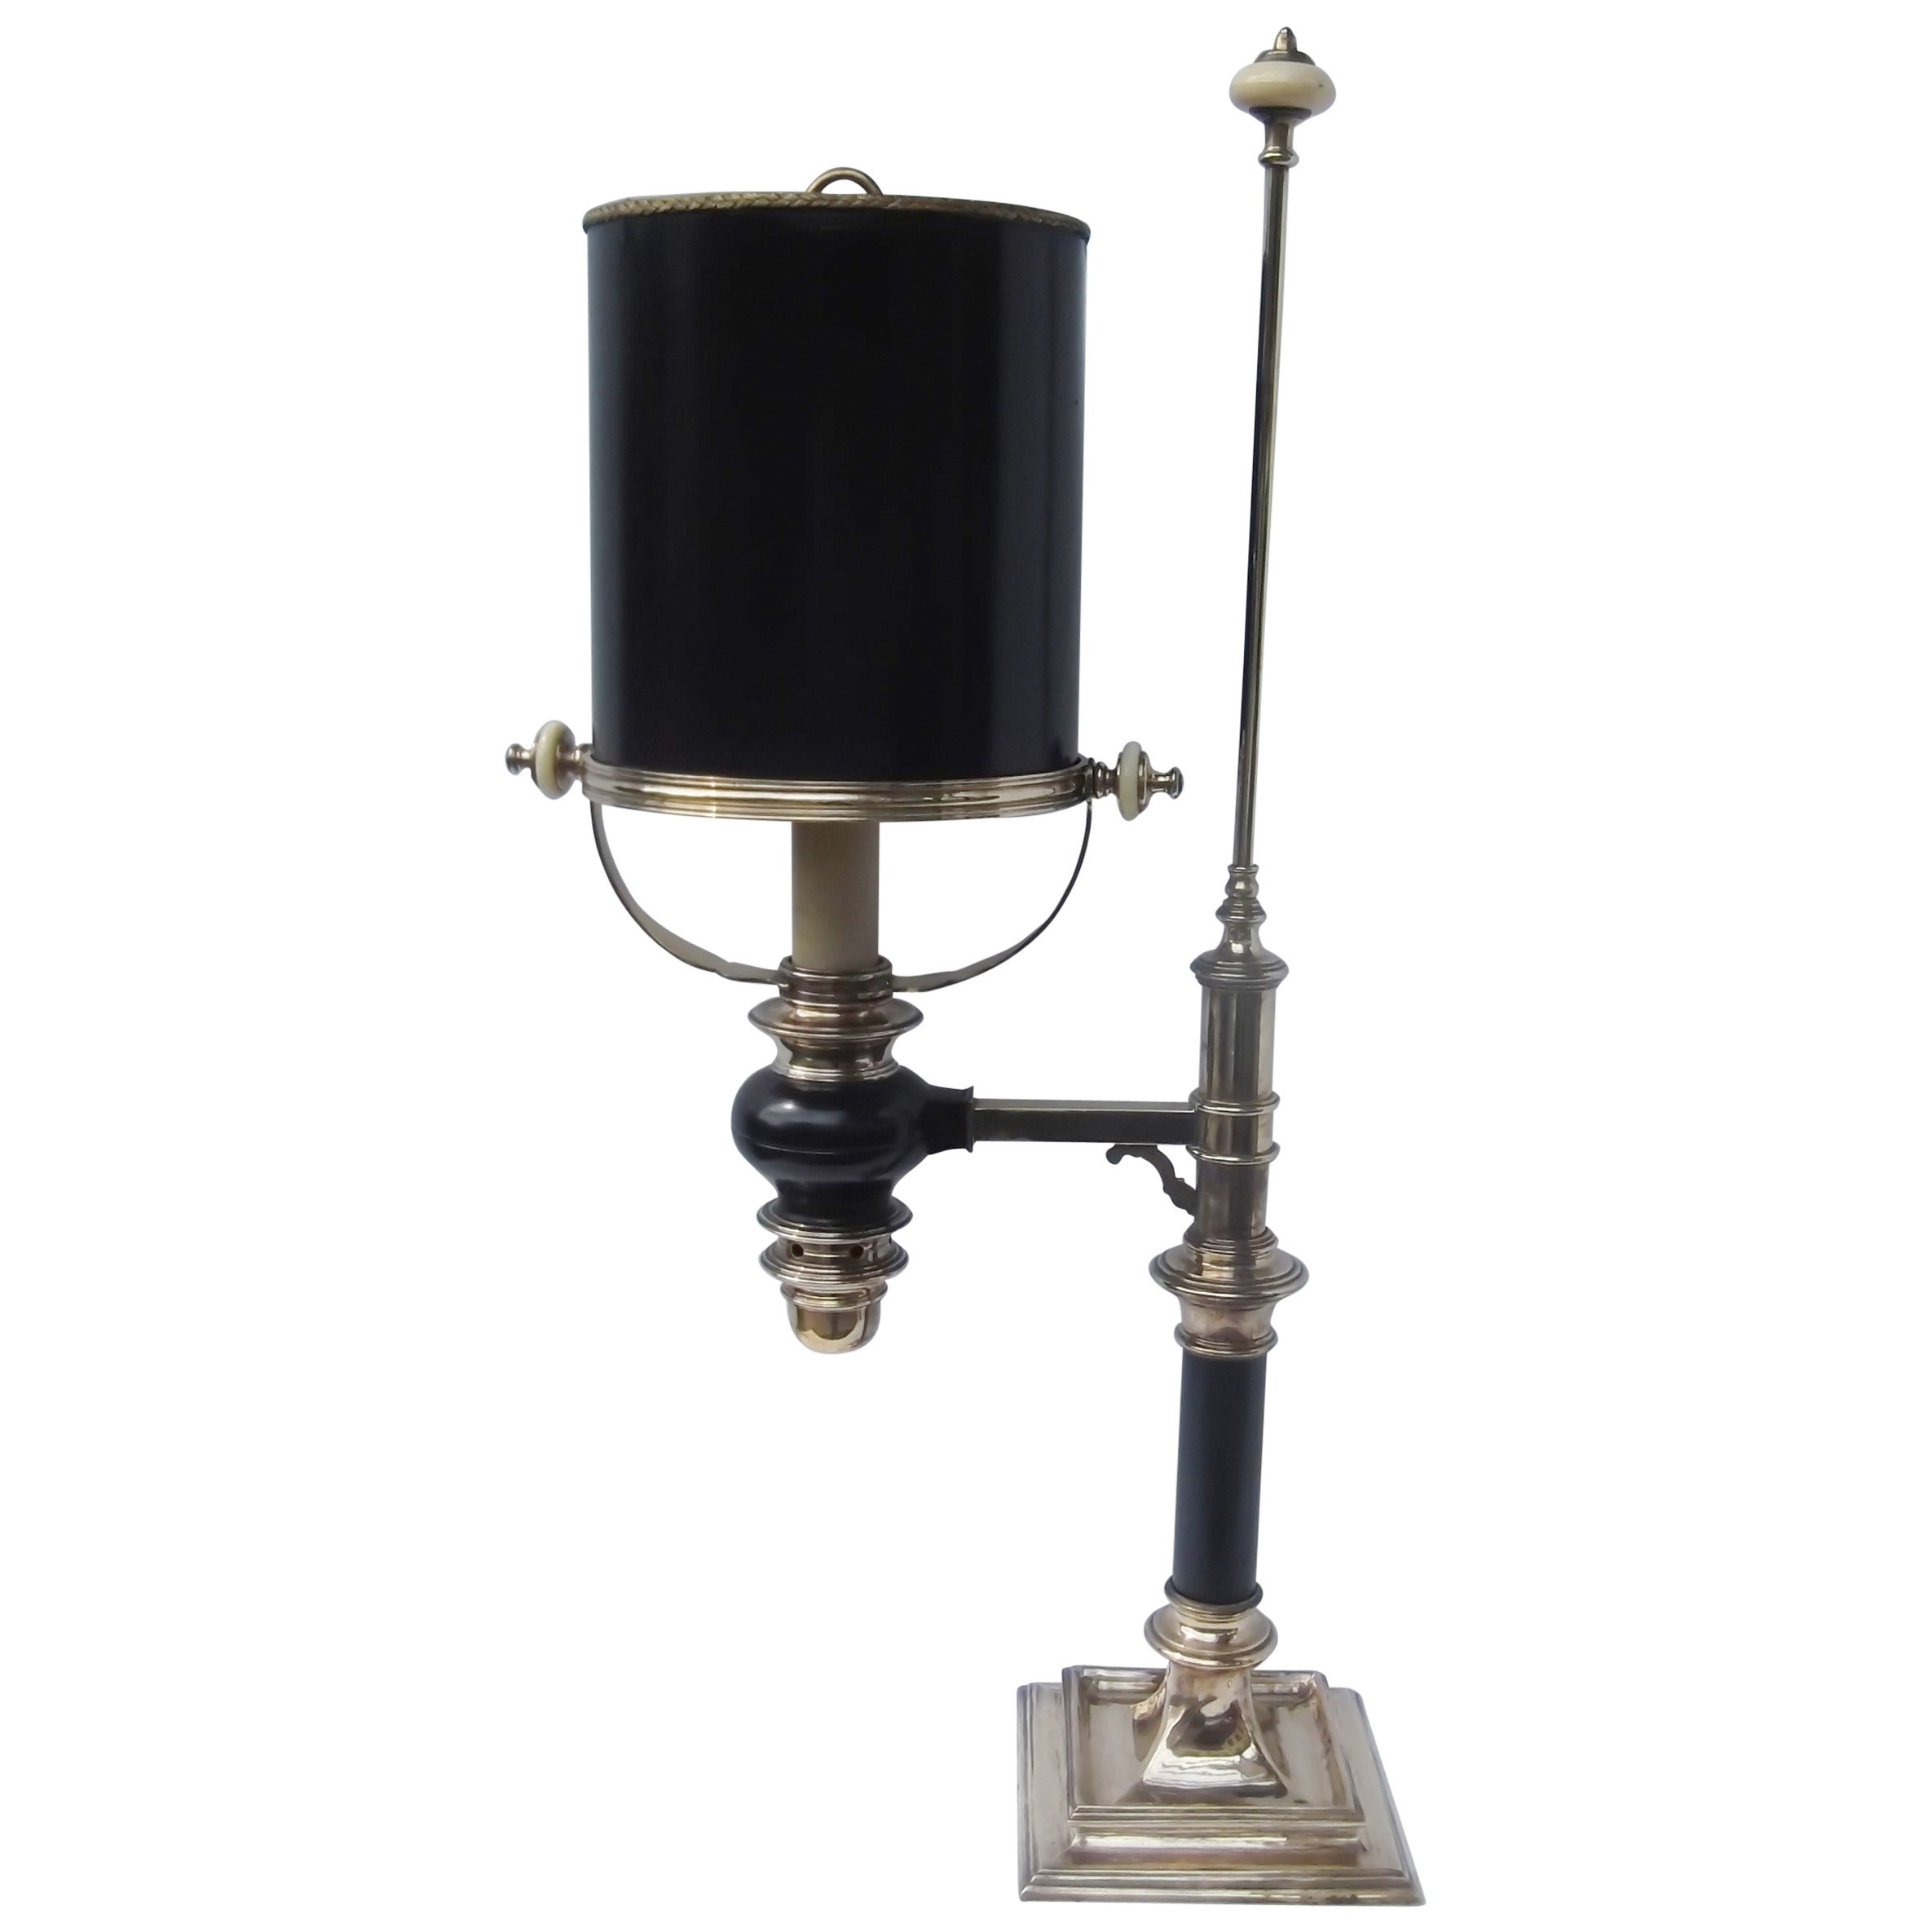 Authentic Brass Chapman Library Table Lamp